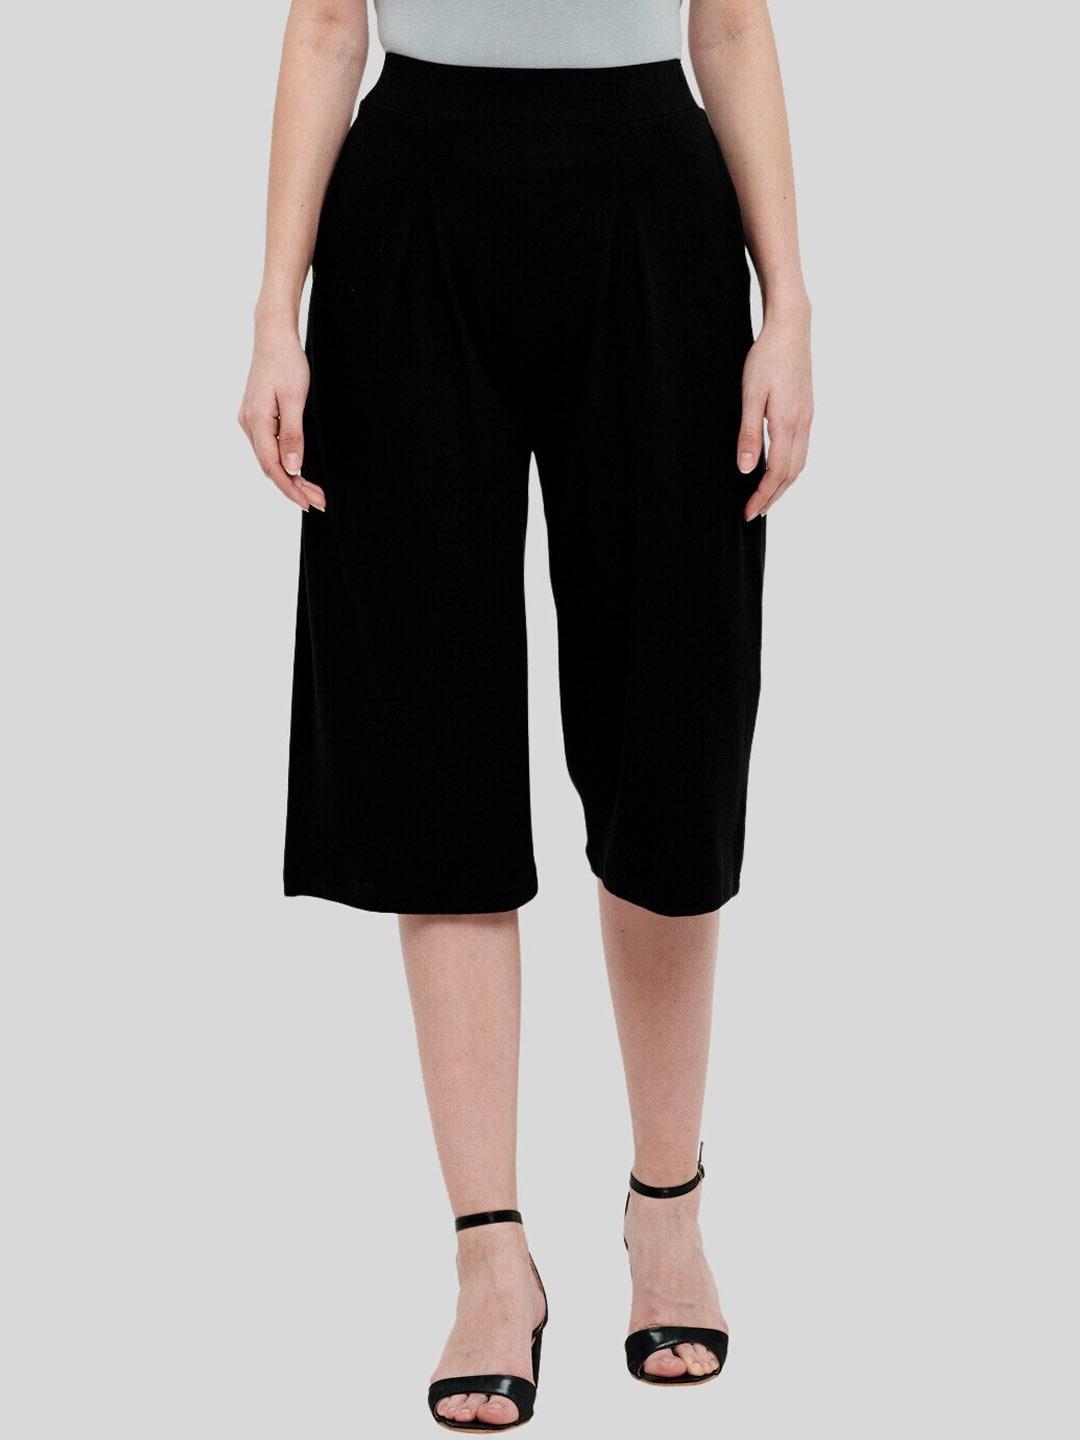 unmade women pleated culottes trousers